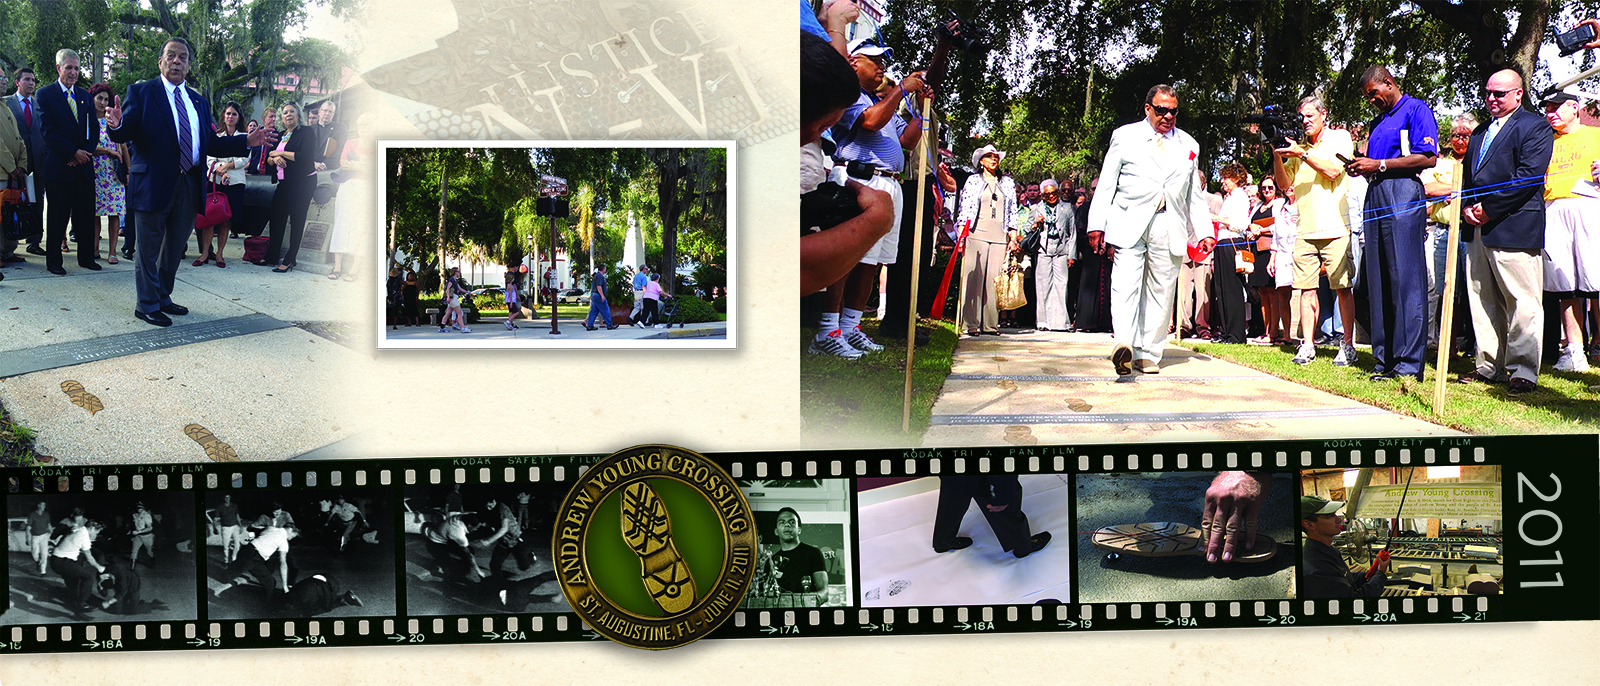 Pages from the “The Many Lives of Andrew Young” coffee table book. These images depict Young returning to St. Augustine, Florida, where he was beaten by Klan members in 1964. The site is now named after him as the Anddrew Young Crossing. Courtesy images